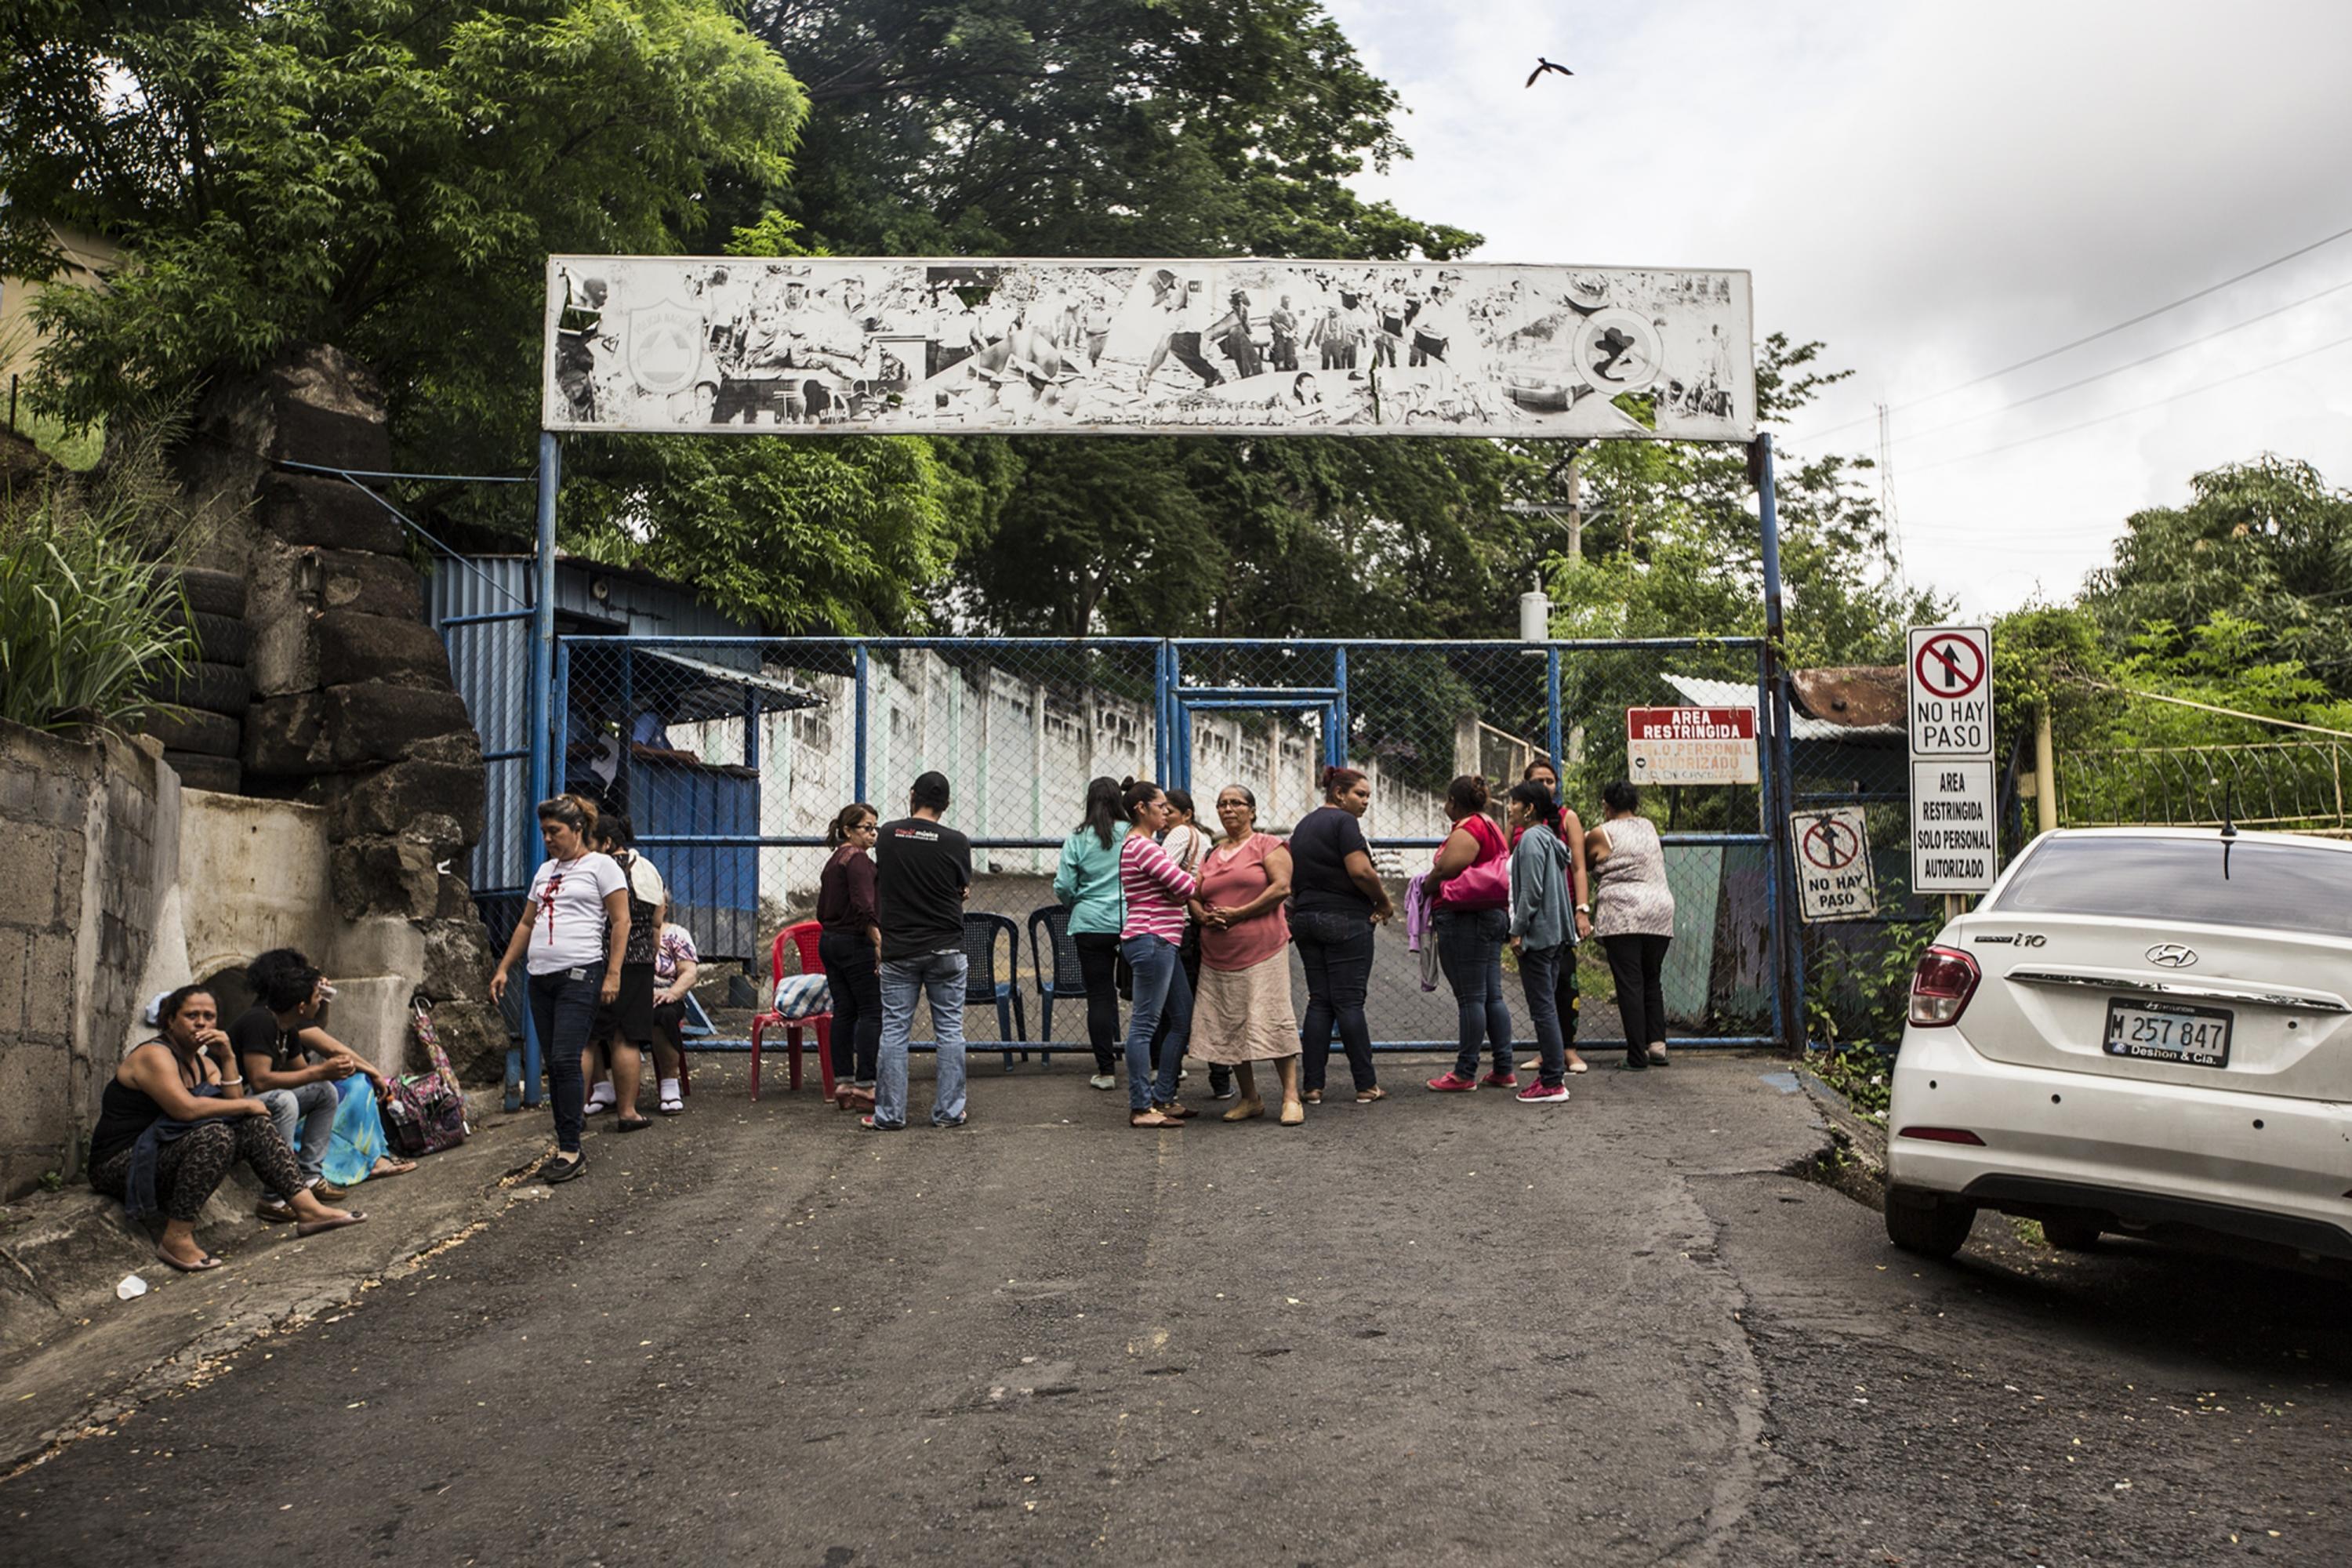 A group of people wait outside El Chipote prison on the afternoon of June 26, 2018, hoping for any information about their detained loved ones. Photo Fred Ramos